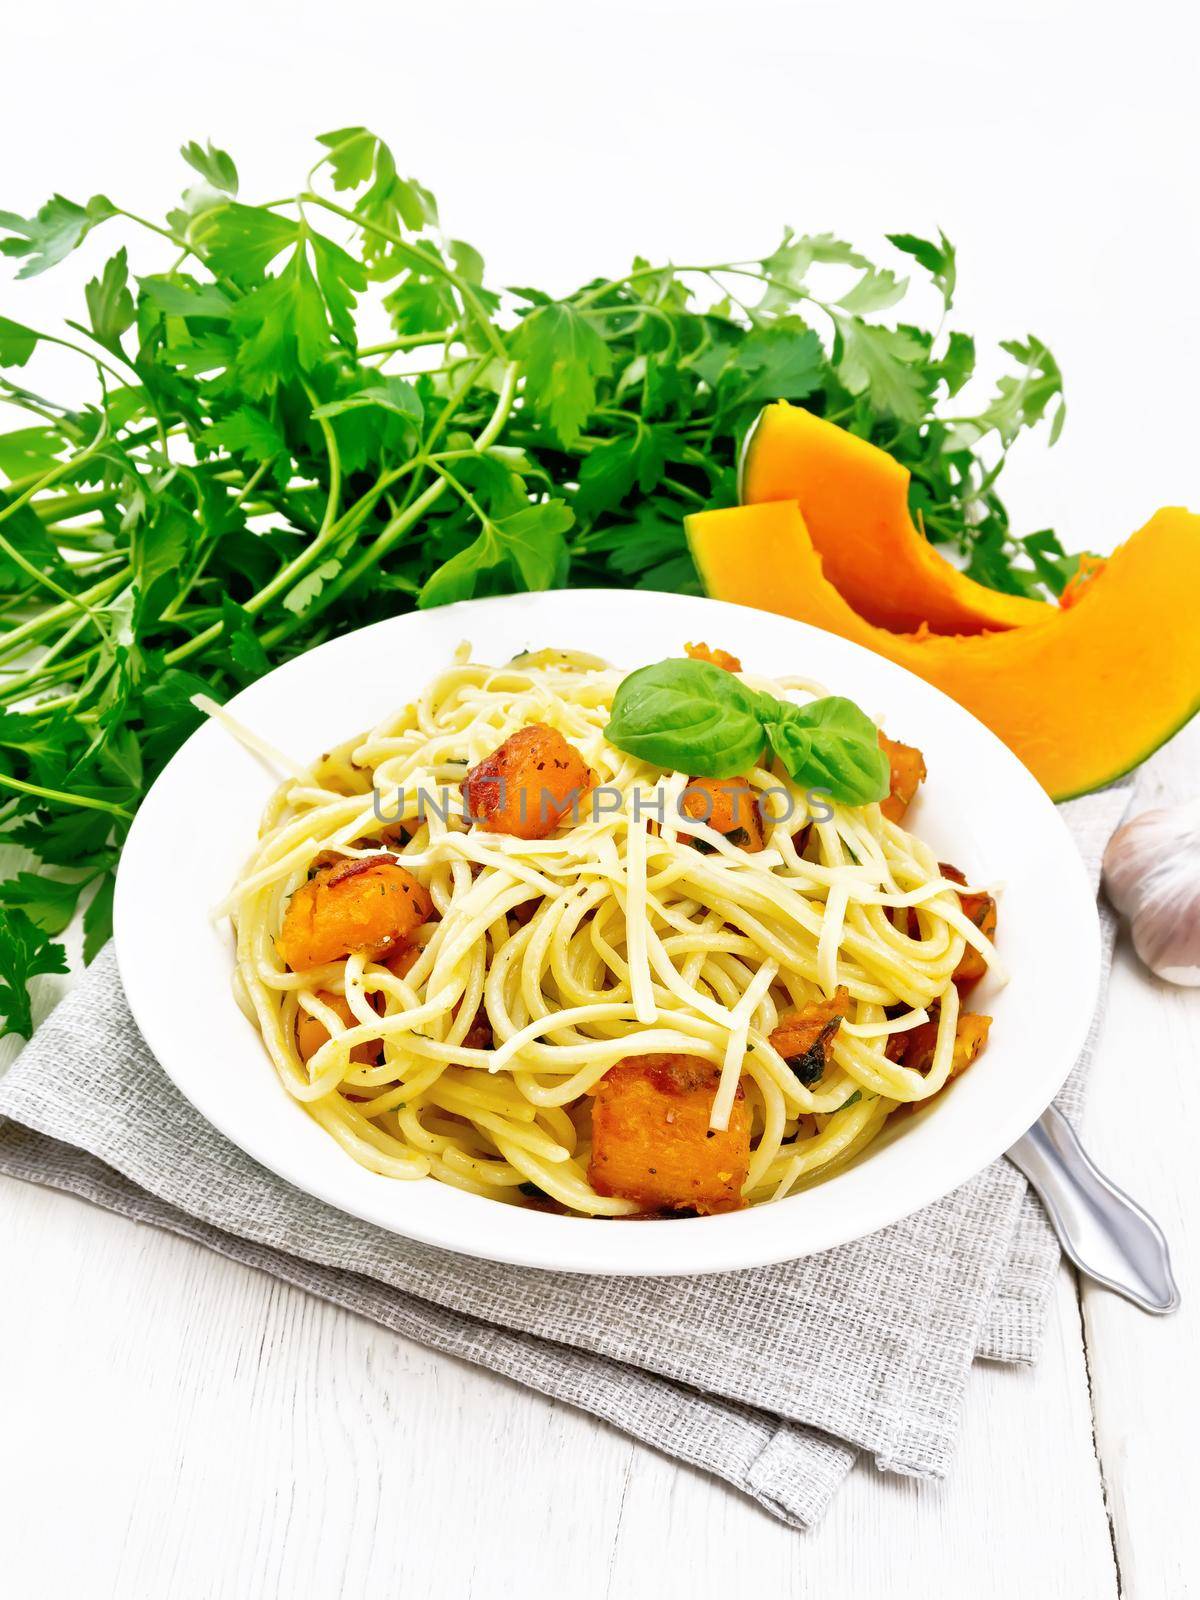 Spaghetti with pumpkin, onion and garlic in a plate on a napkin, basil, parsley and fork on wooden board background